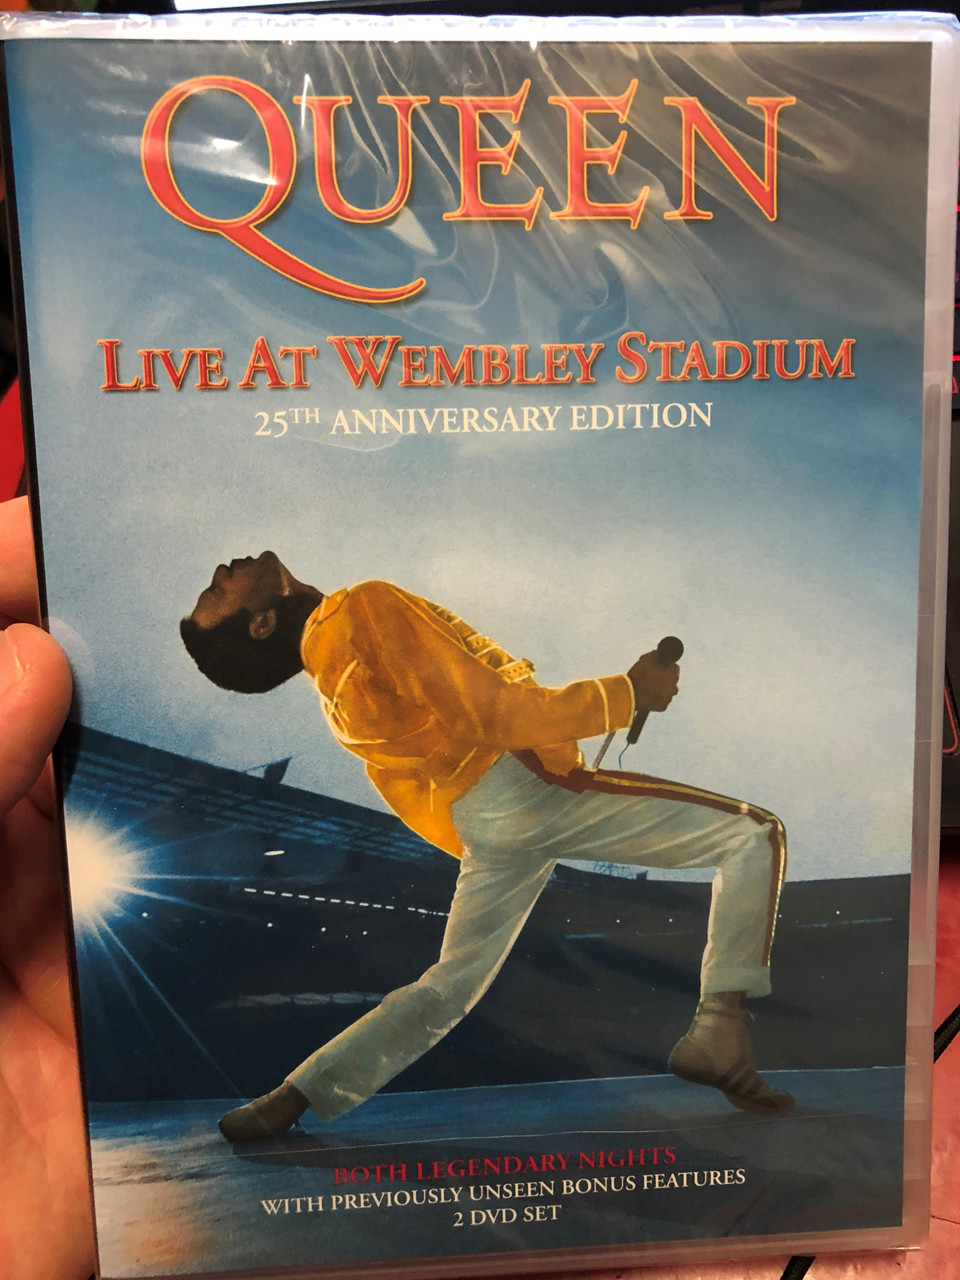 Queen - Live at Wembley Stadium (25th Anniversary Edition) / 2 DVDs /  Produced by: Simon Lupton and Rhys Thomas - bibleinmylanguage